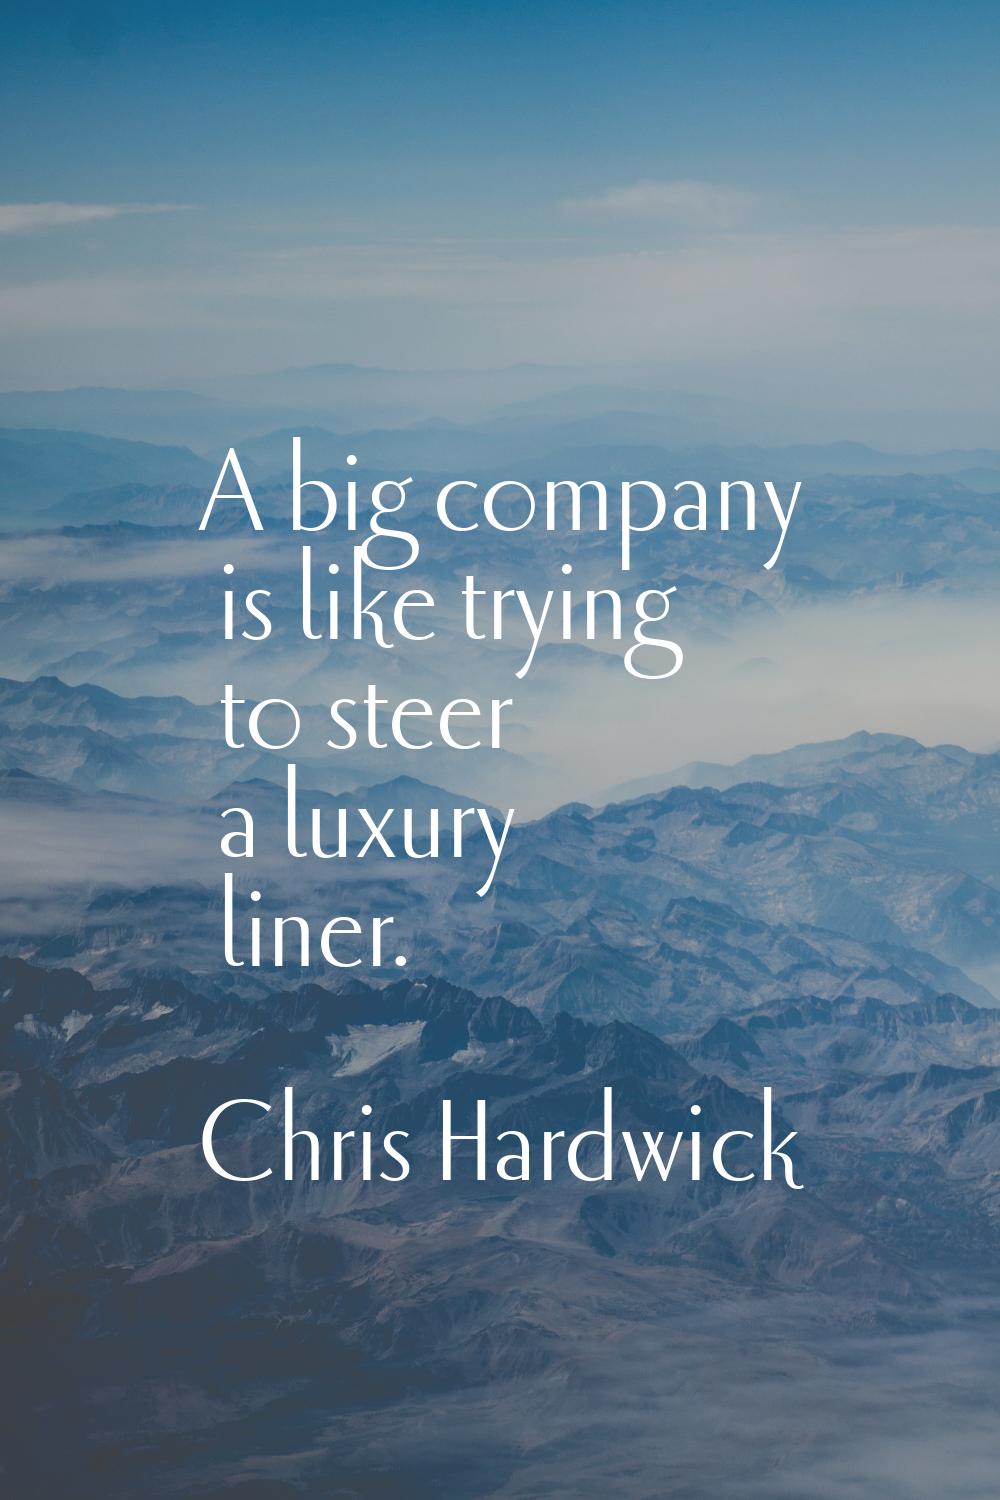 A big company is like trying to steer a luxury liner.